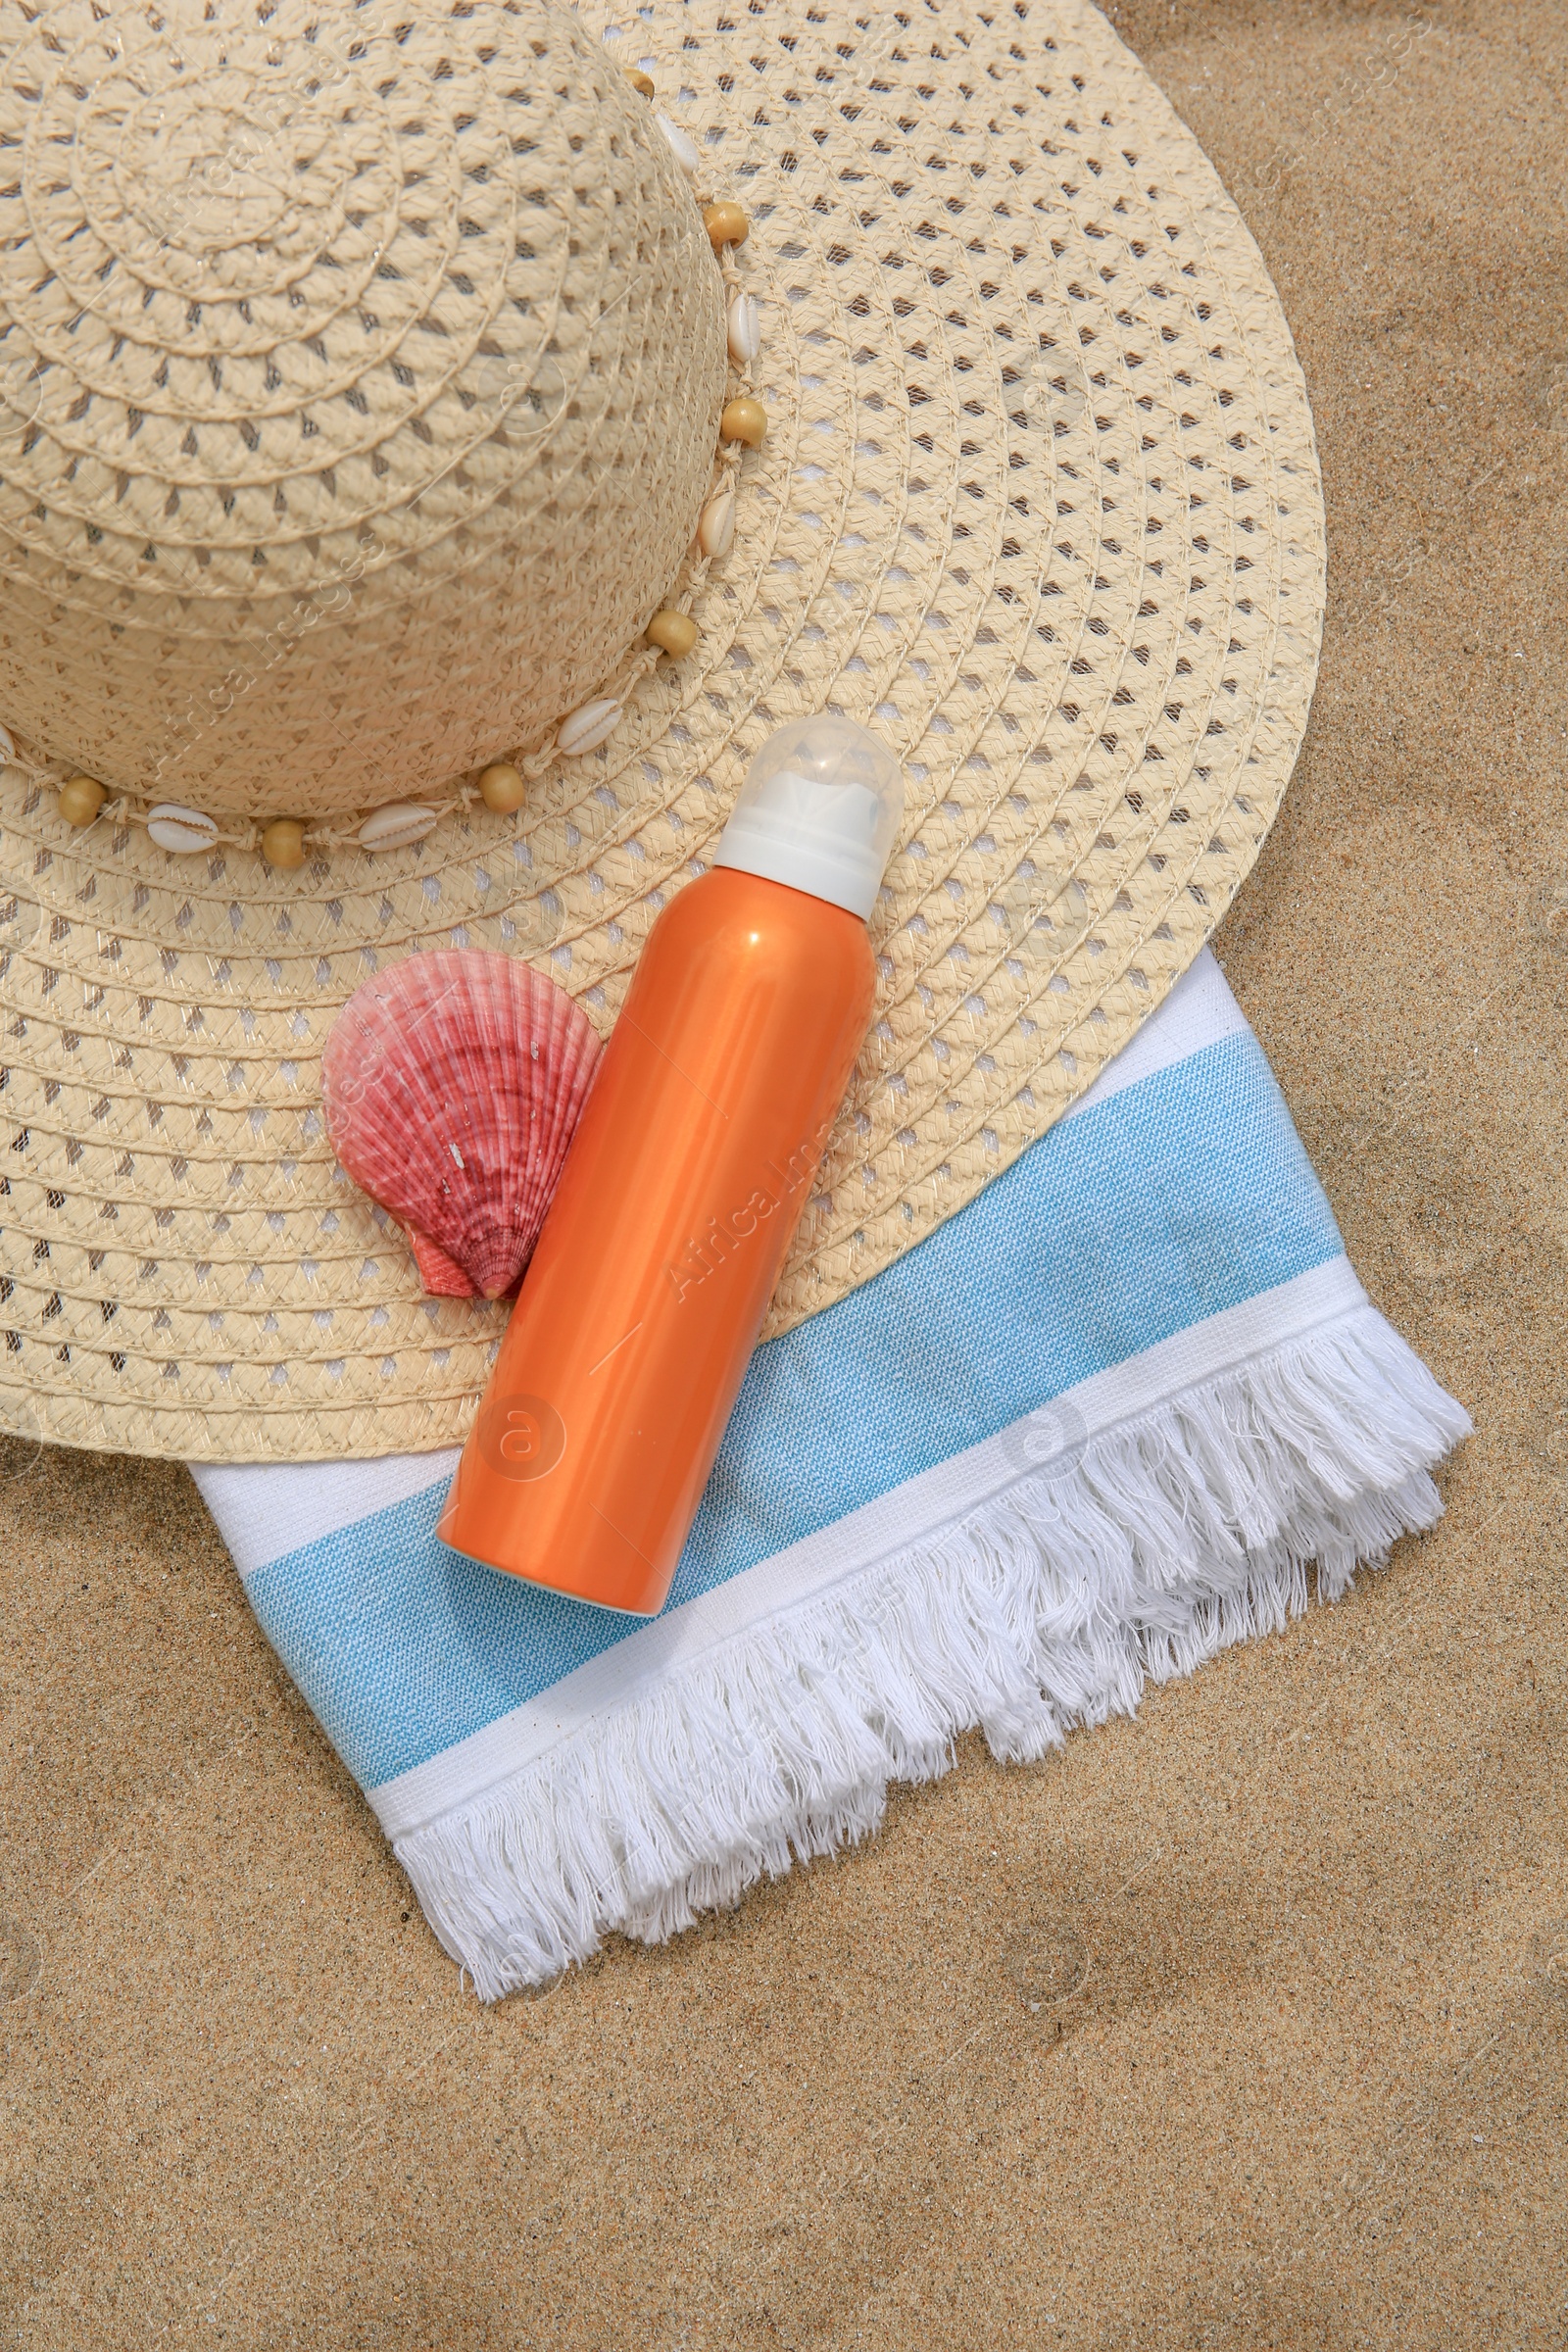 Photo of Sunscreen, hat, seashell and towel on sand, flat lay. Sun protection care